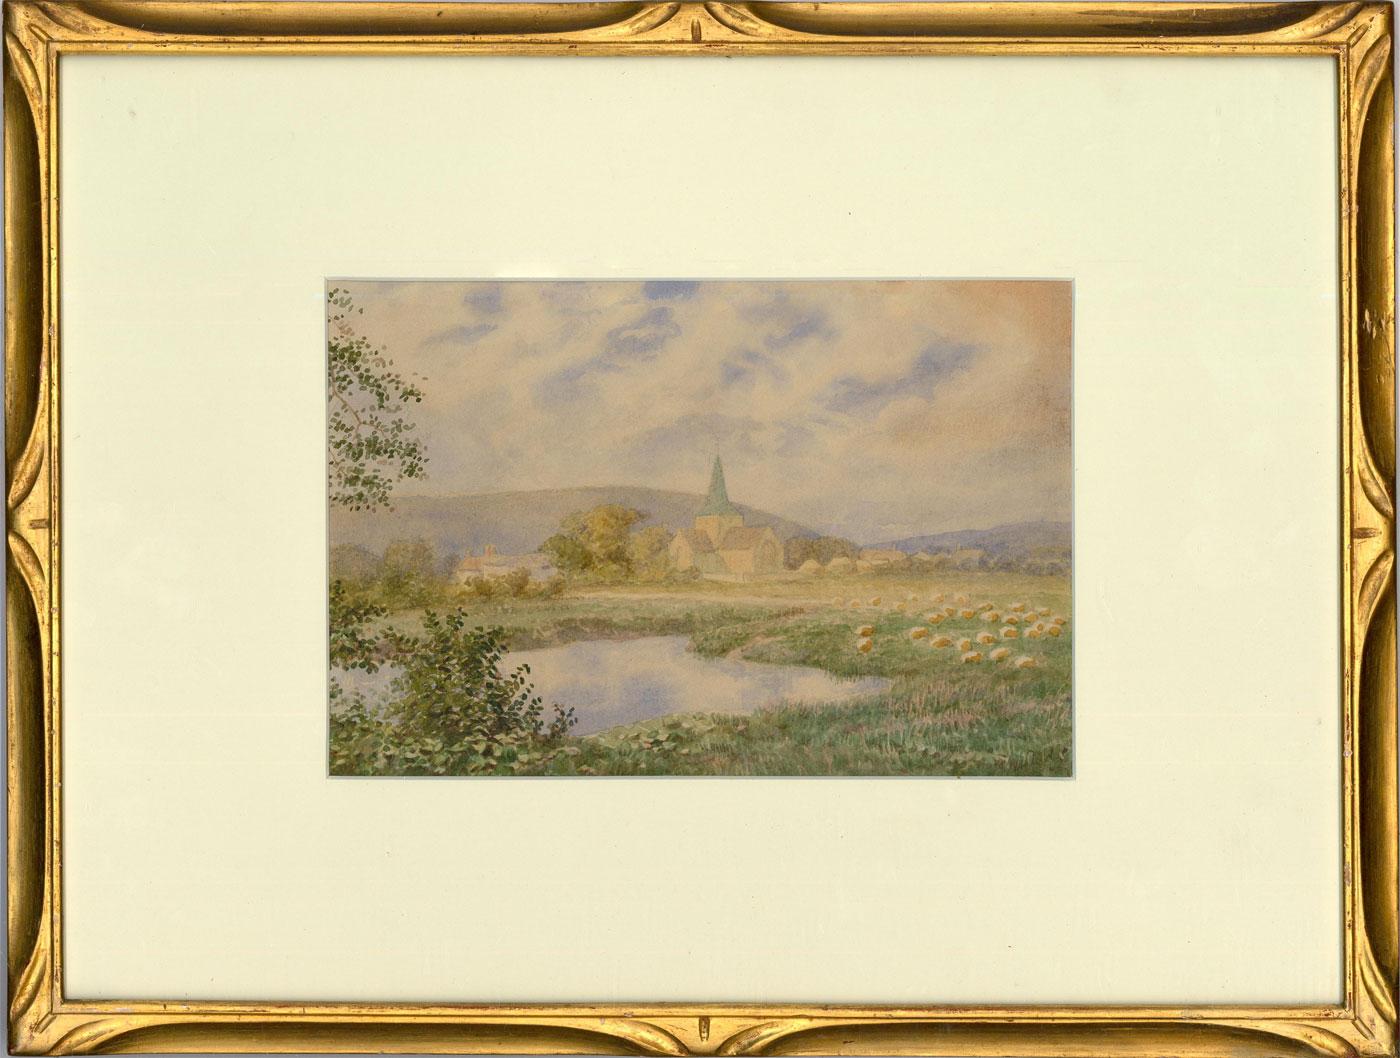 A charming late 19th century watercolour of a pastoral landscape, with church spire viewable from distance fields. The artist has signed the scene to the lower right and the watercolour has been well-presented in an elegant gilt frame with carved